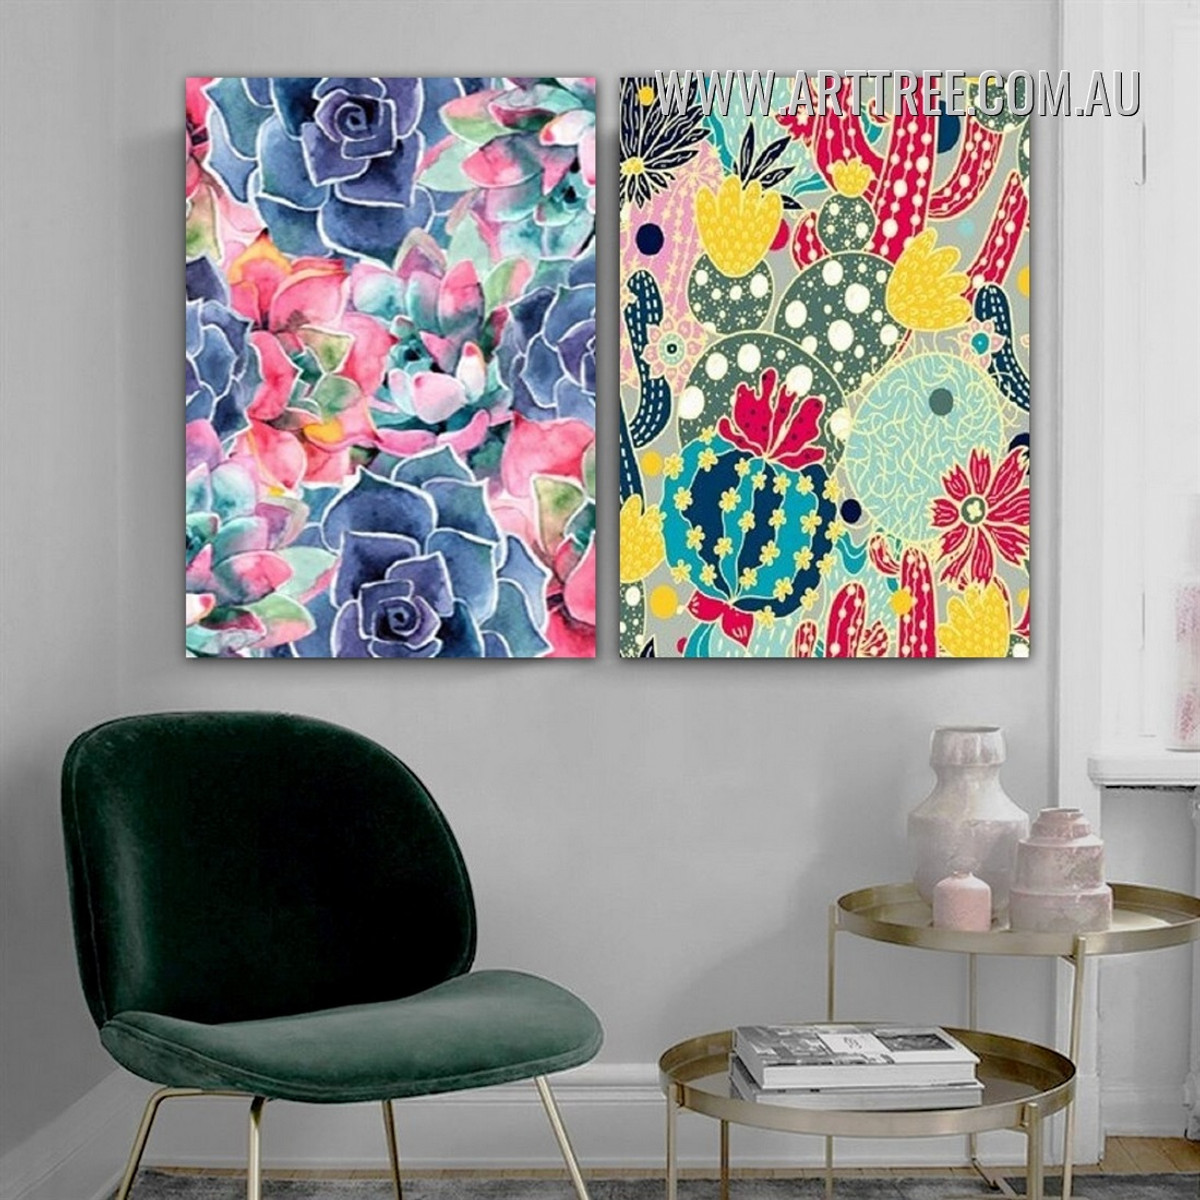 Chromatic Blossoms Cactus Floral Stretched 2 Modern Piece Artwork Photo Abstract Canvas Print for Room Wall Equipment